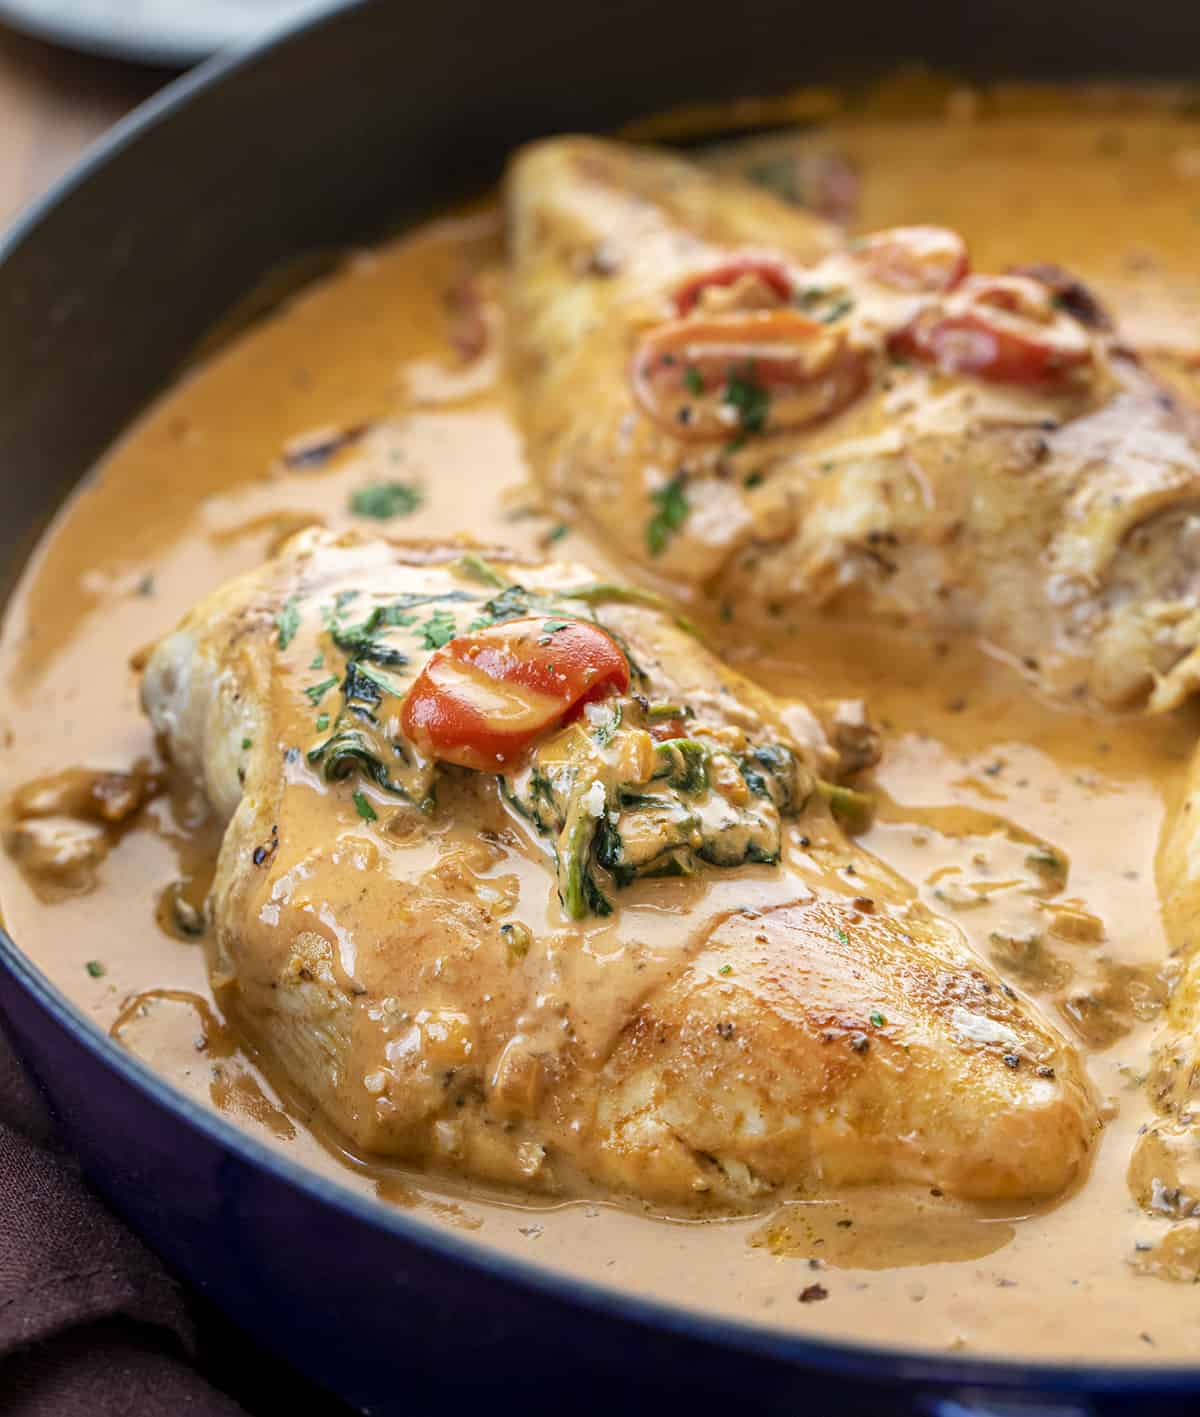 Creamy Tuscan Chicken in a Pan with Sauce Drizzled Over the Chicken Breasts. Dinner, Supper, Chicken Recipes, What to Cook for Dinner, Easy Chicken Recipe, How to Make Tuscan Chicken, What is Tuscan, Creamy Tomato Sauce Chicken, Kid Favorites Dinner, i am homesteader, iamhomesteader